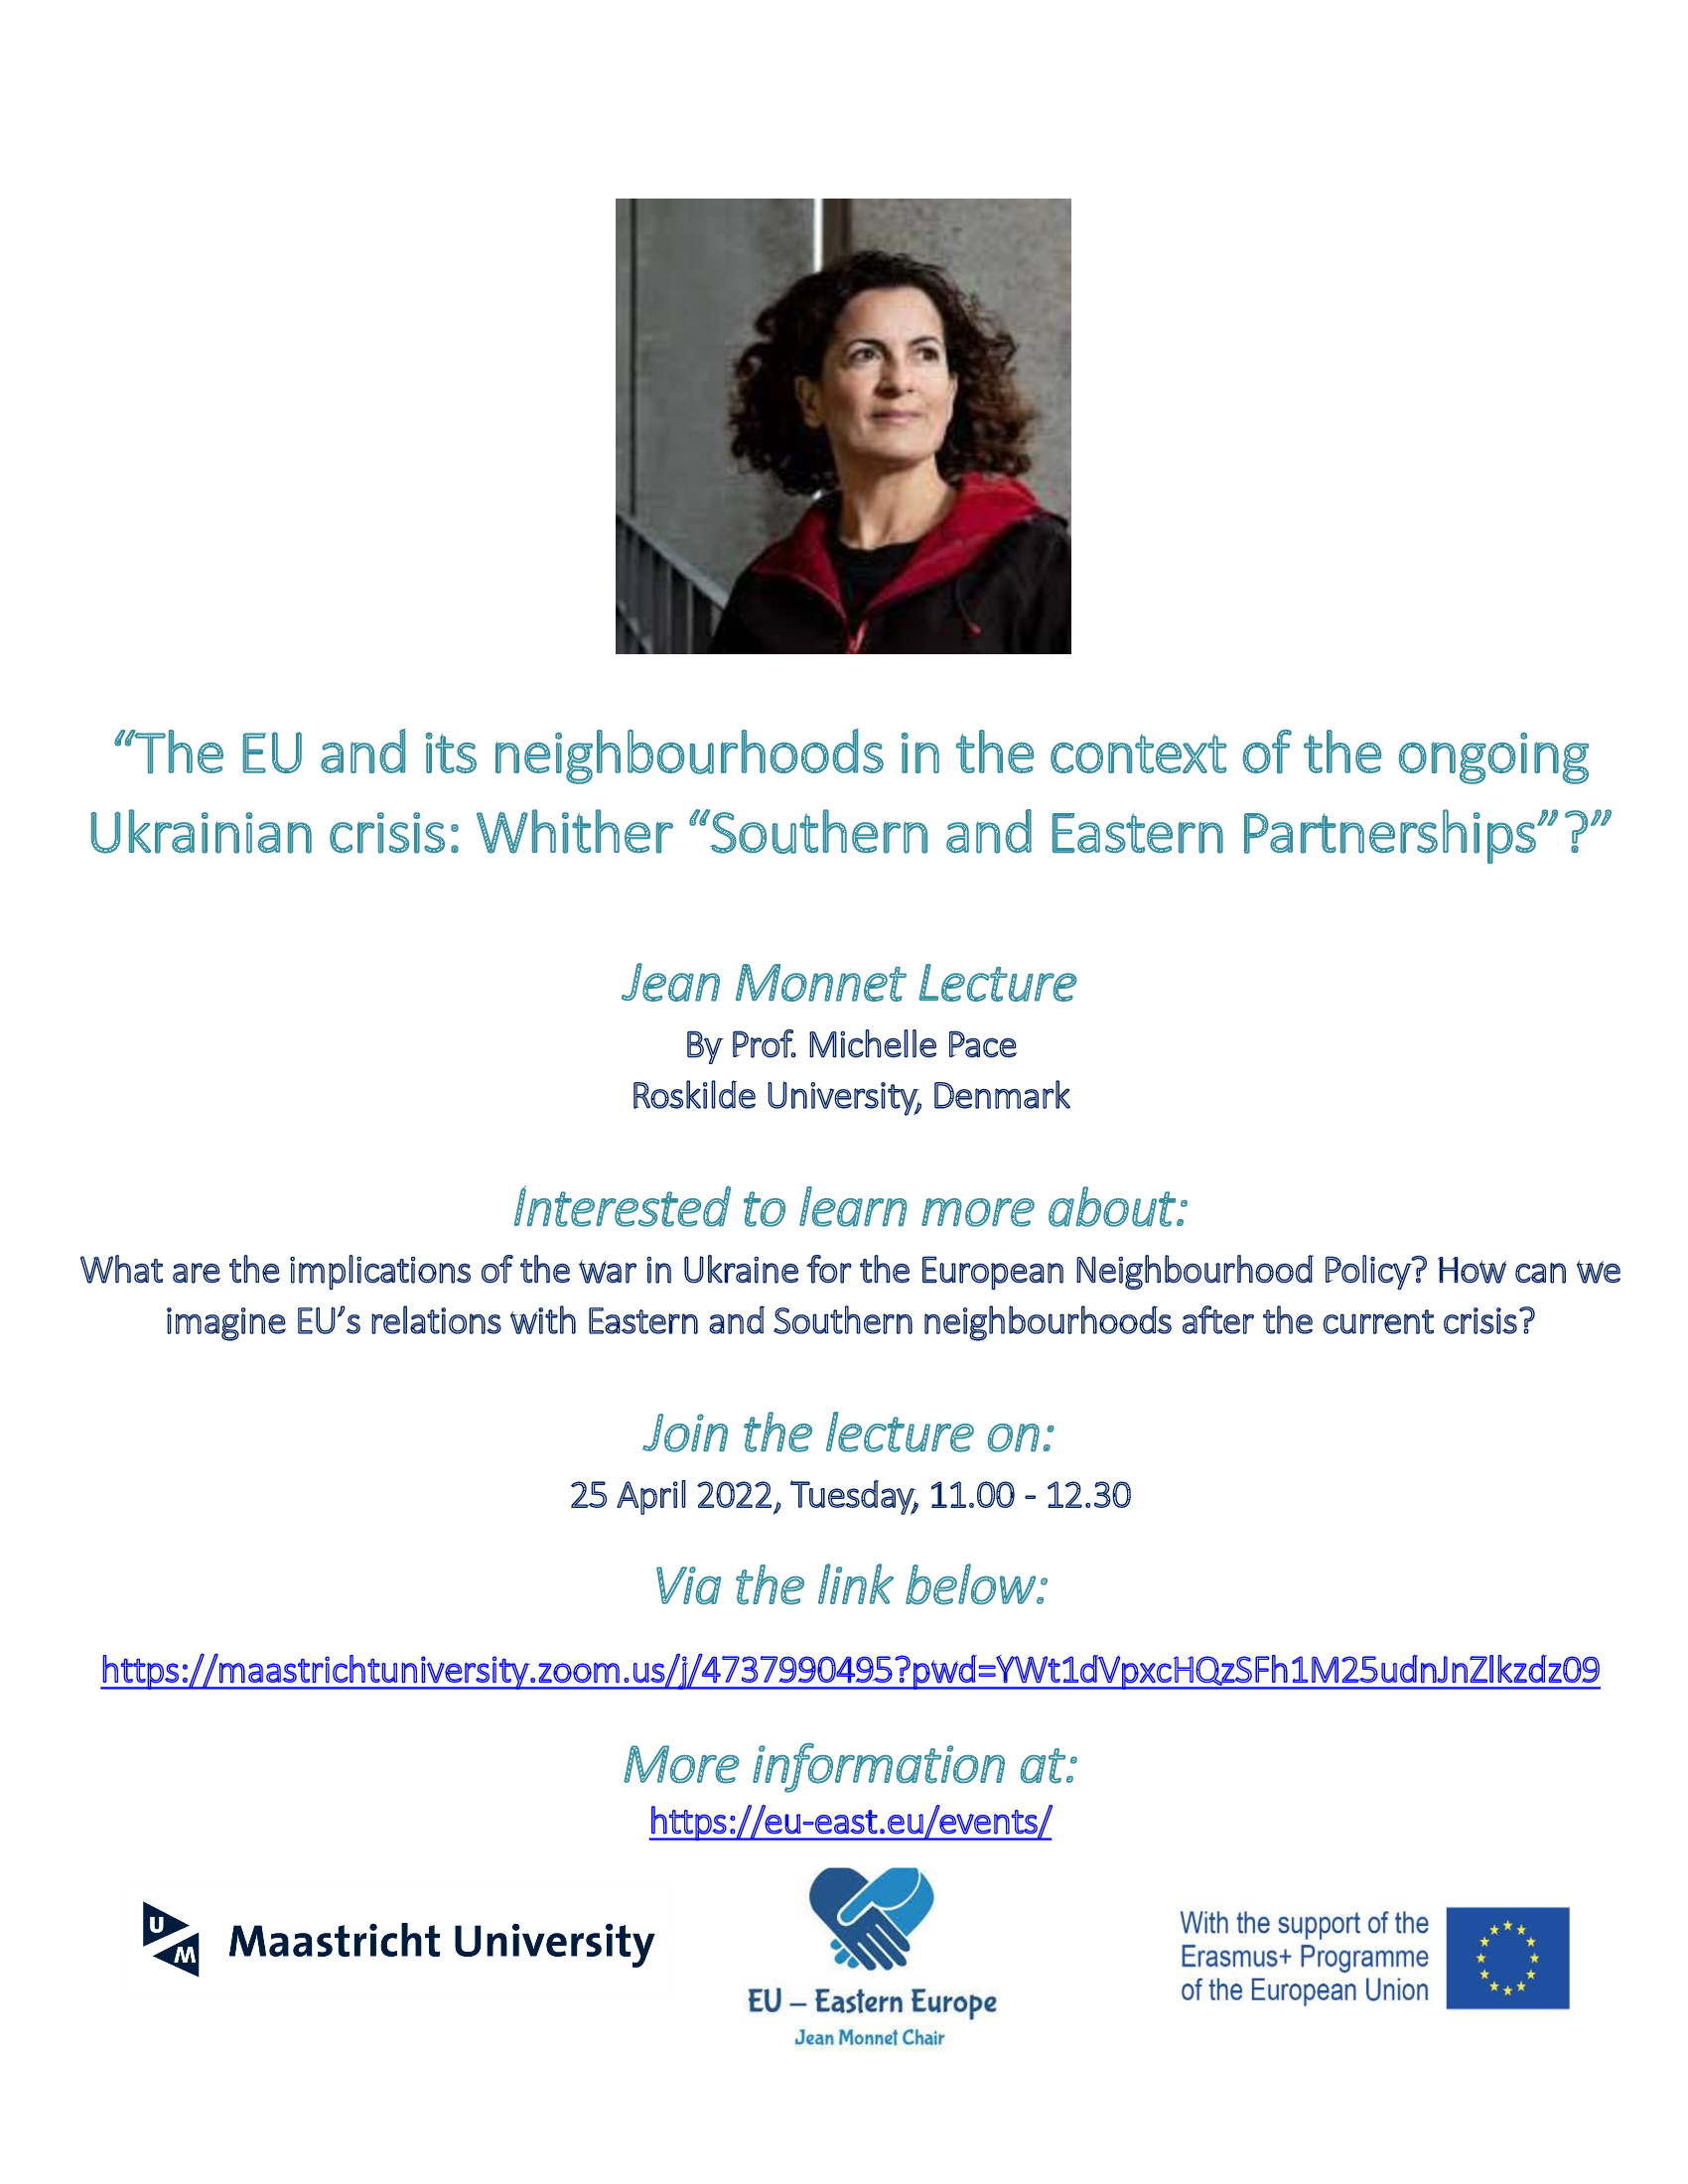 Prof. Michelle Pace will deliver the Jean Monnet Chair Lecture 3 for students at Maastricht University today 25 April